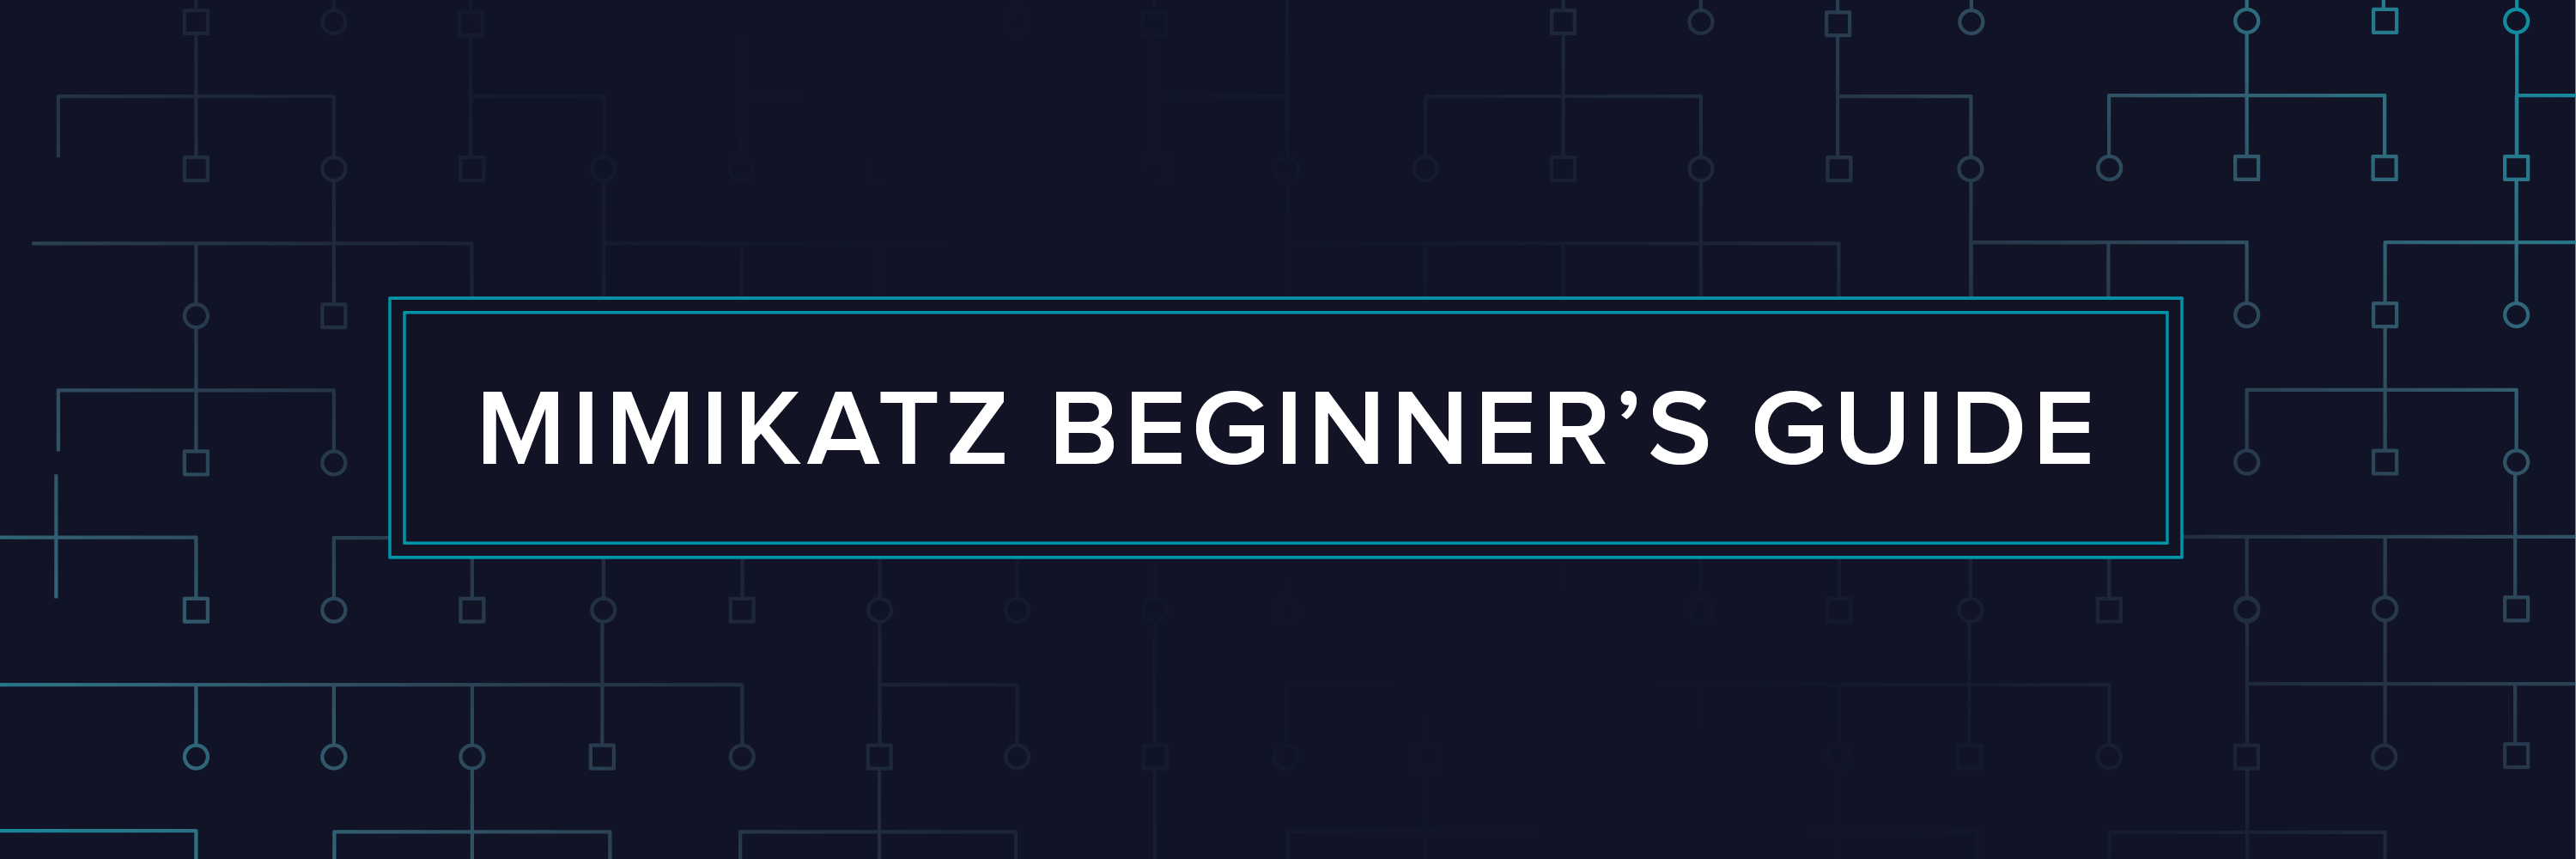 What is Mimikatz: The Beginner's Guide